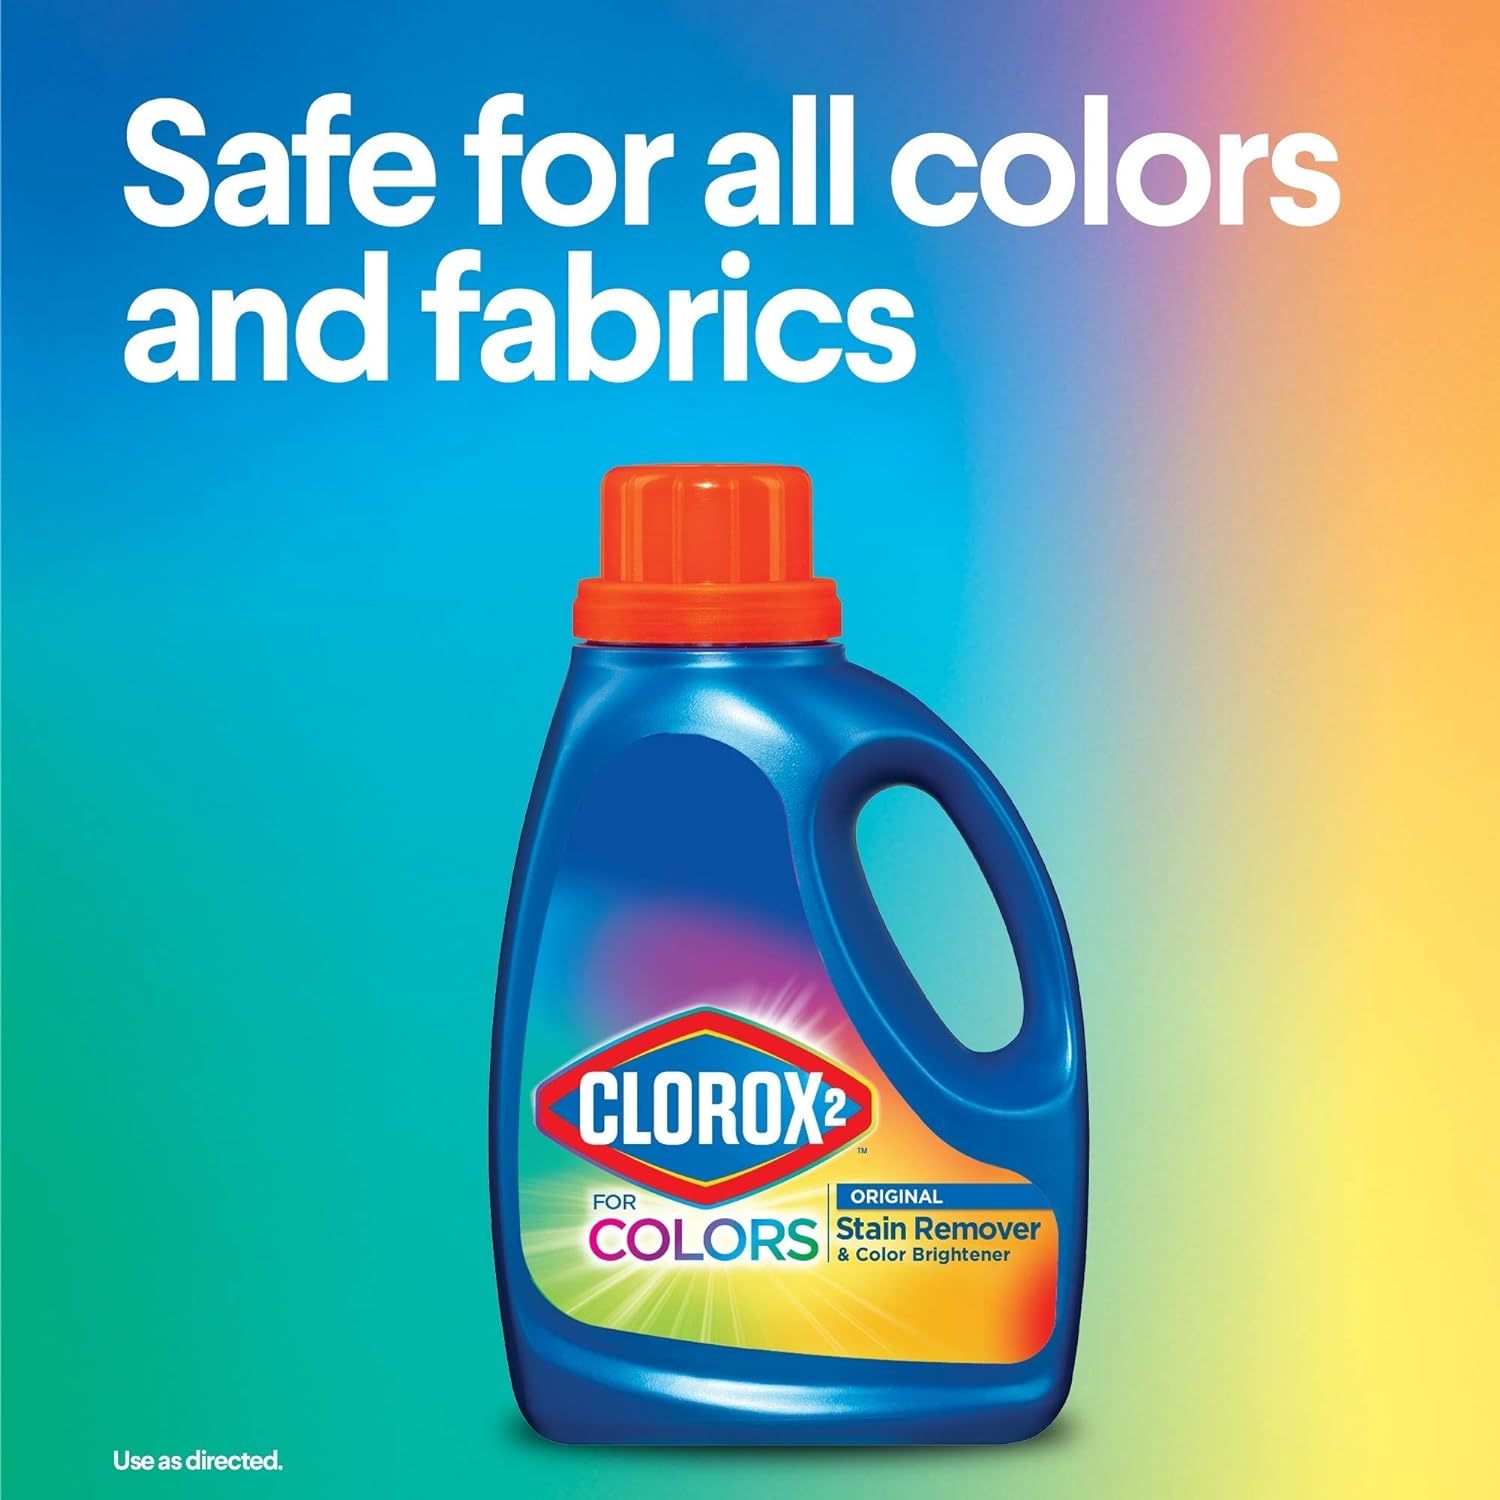 Clorox 2 Stain Remover and Color Brightener, 22 Ounces (Packaging May Vary), 22 Fl Oz (Pack of 1) : Health & Household